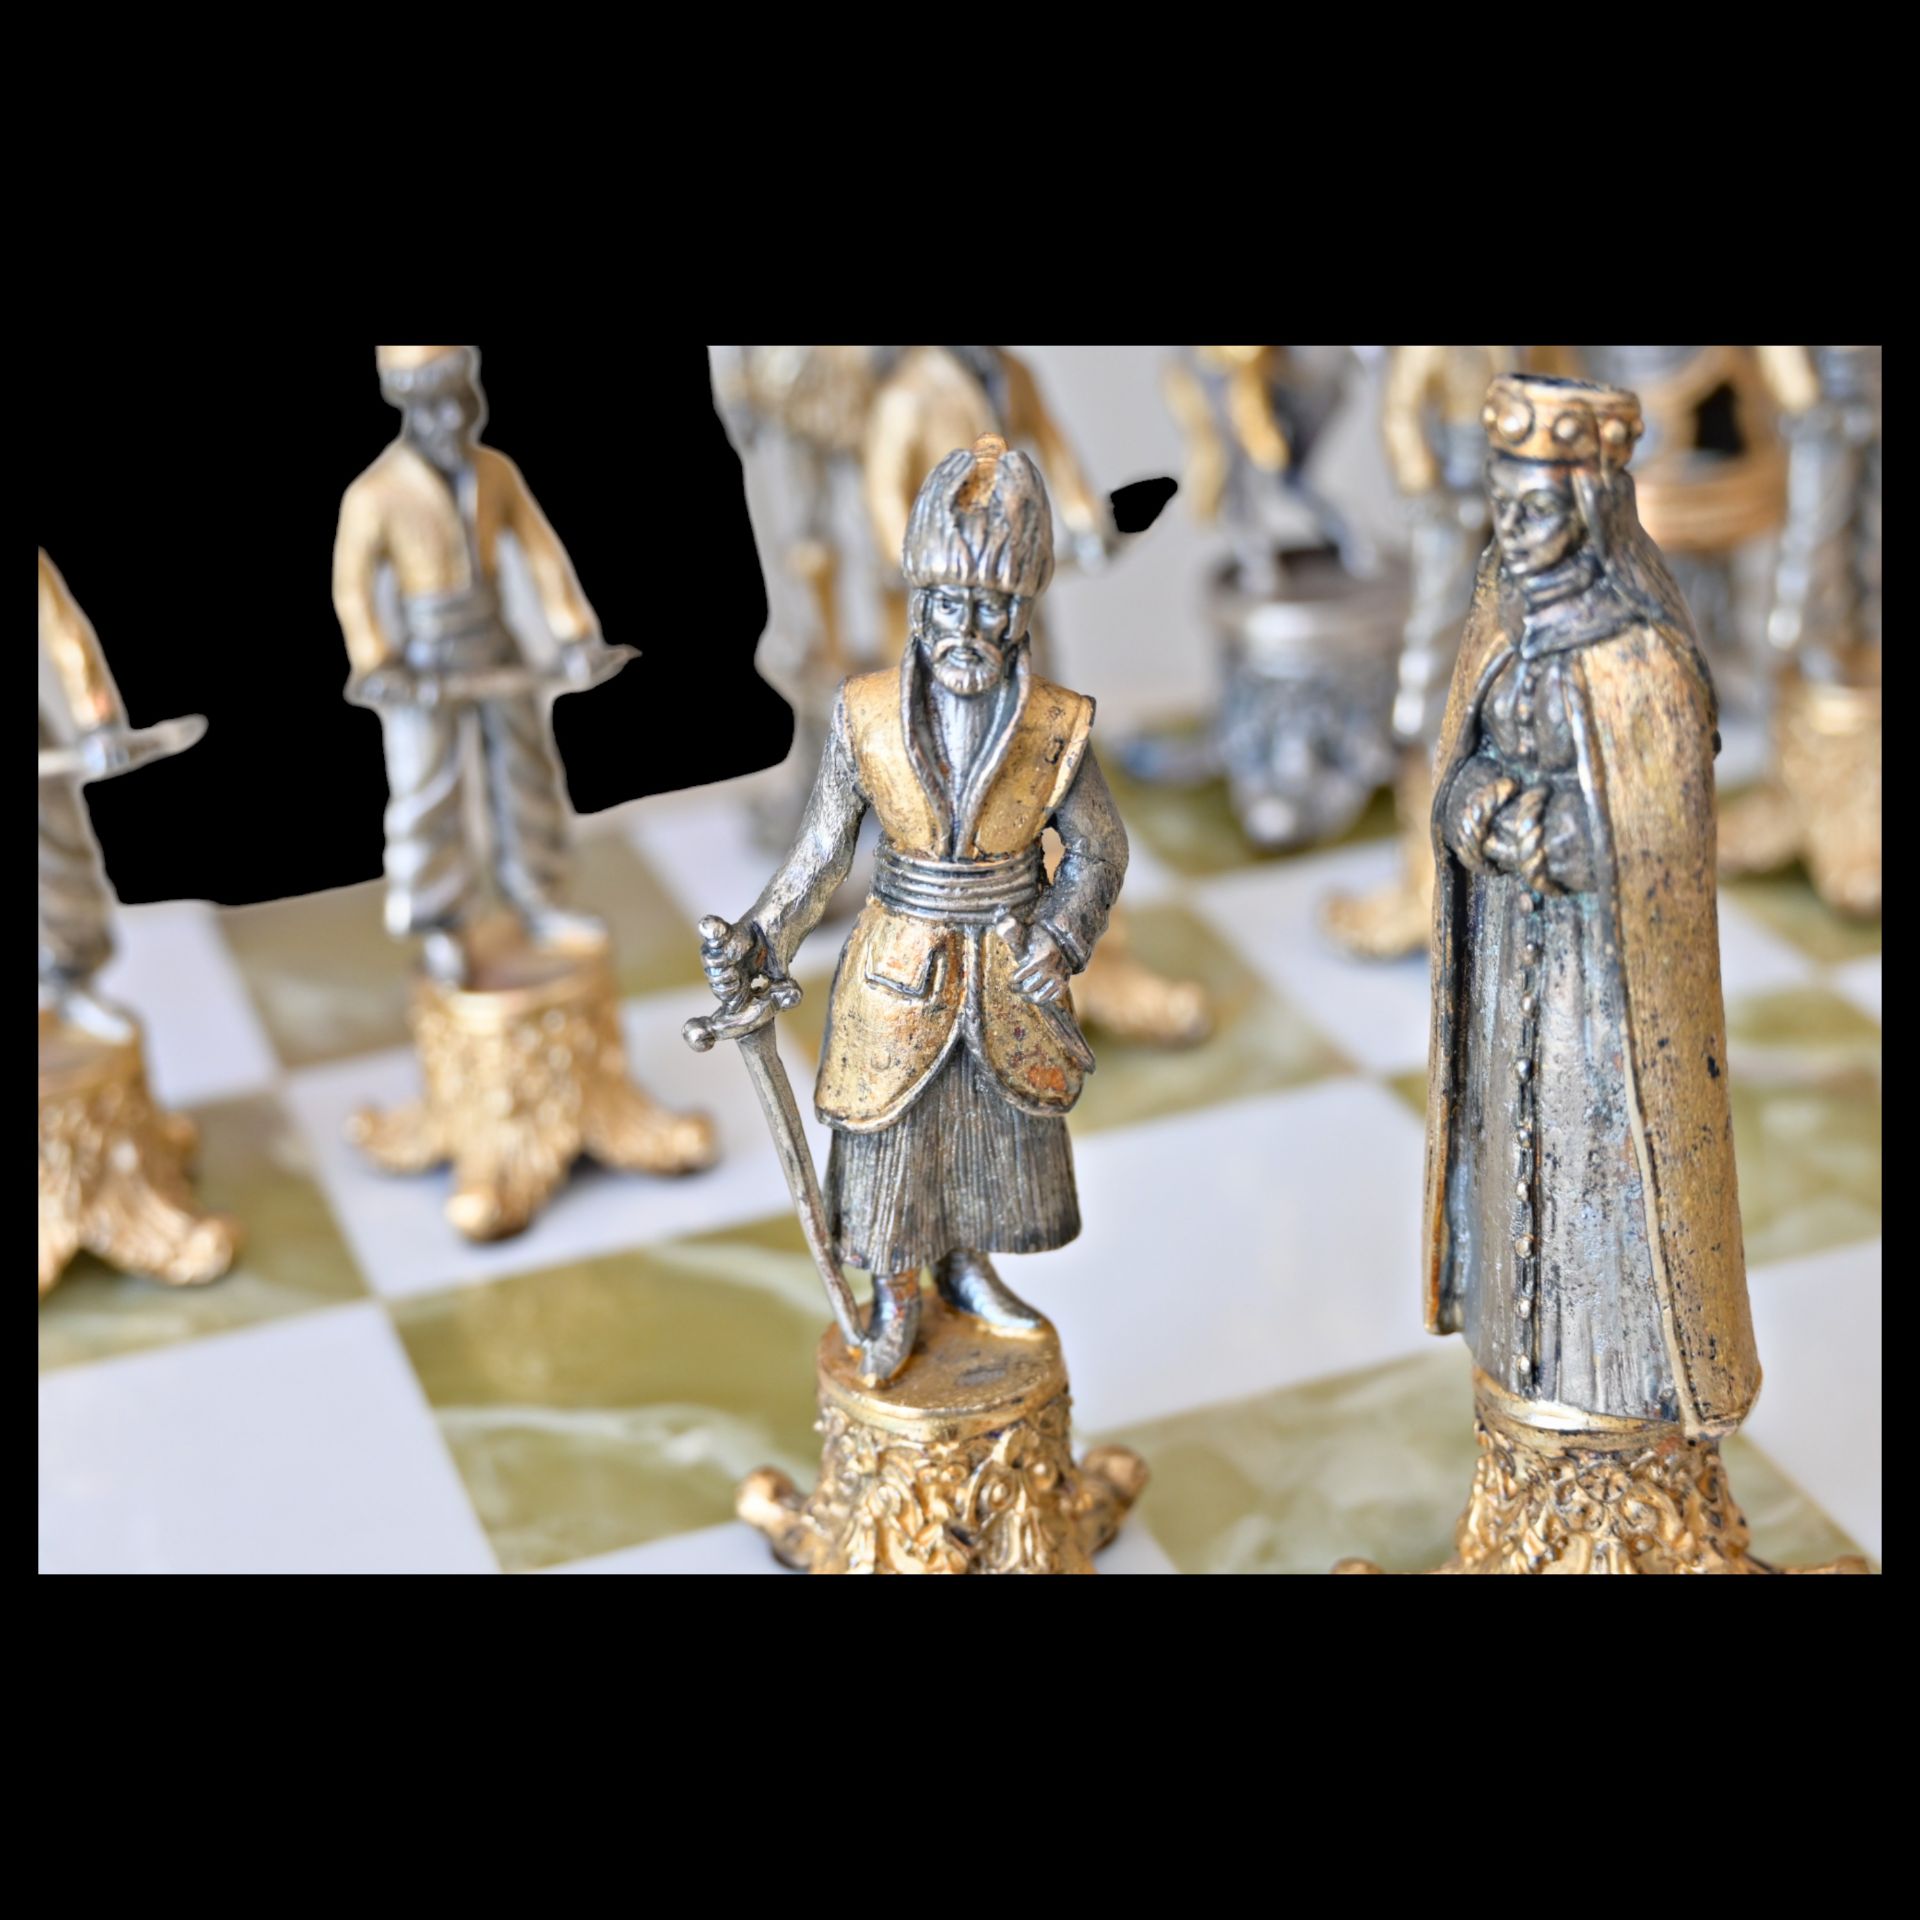 Piero Benzoni Onyx and Marble Silver-Plated and Gilt Bronze Chess Set, 70-80 years of the 20th _. - Bild 13 aus 13